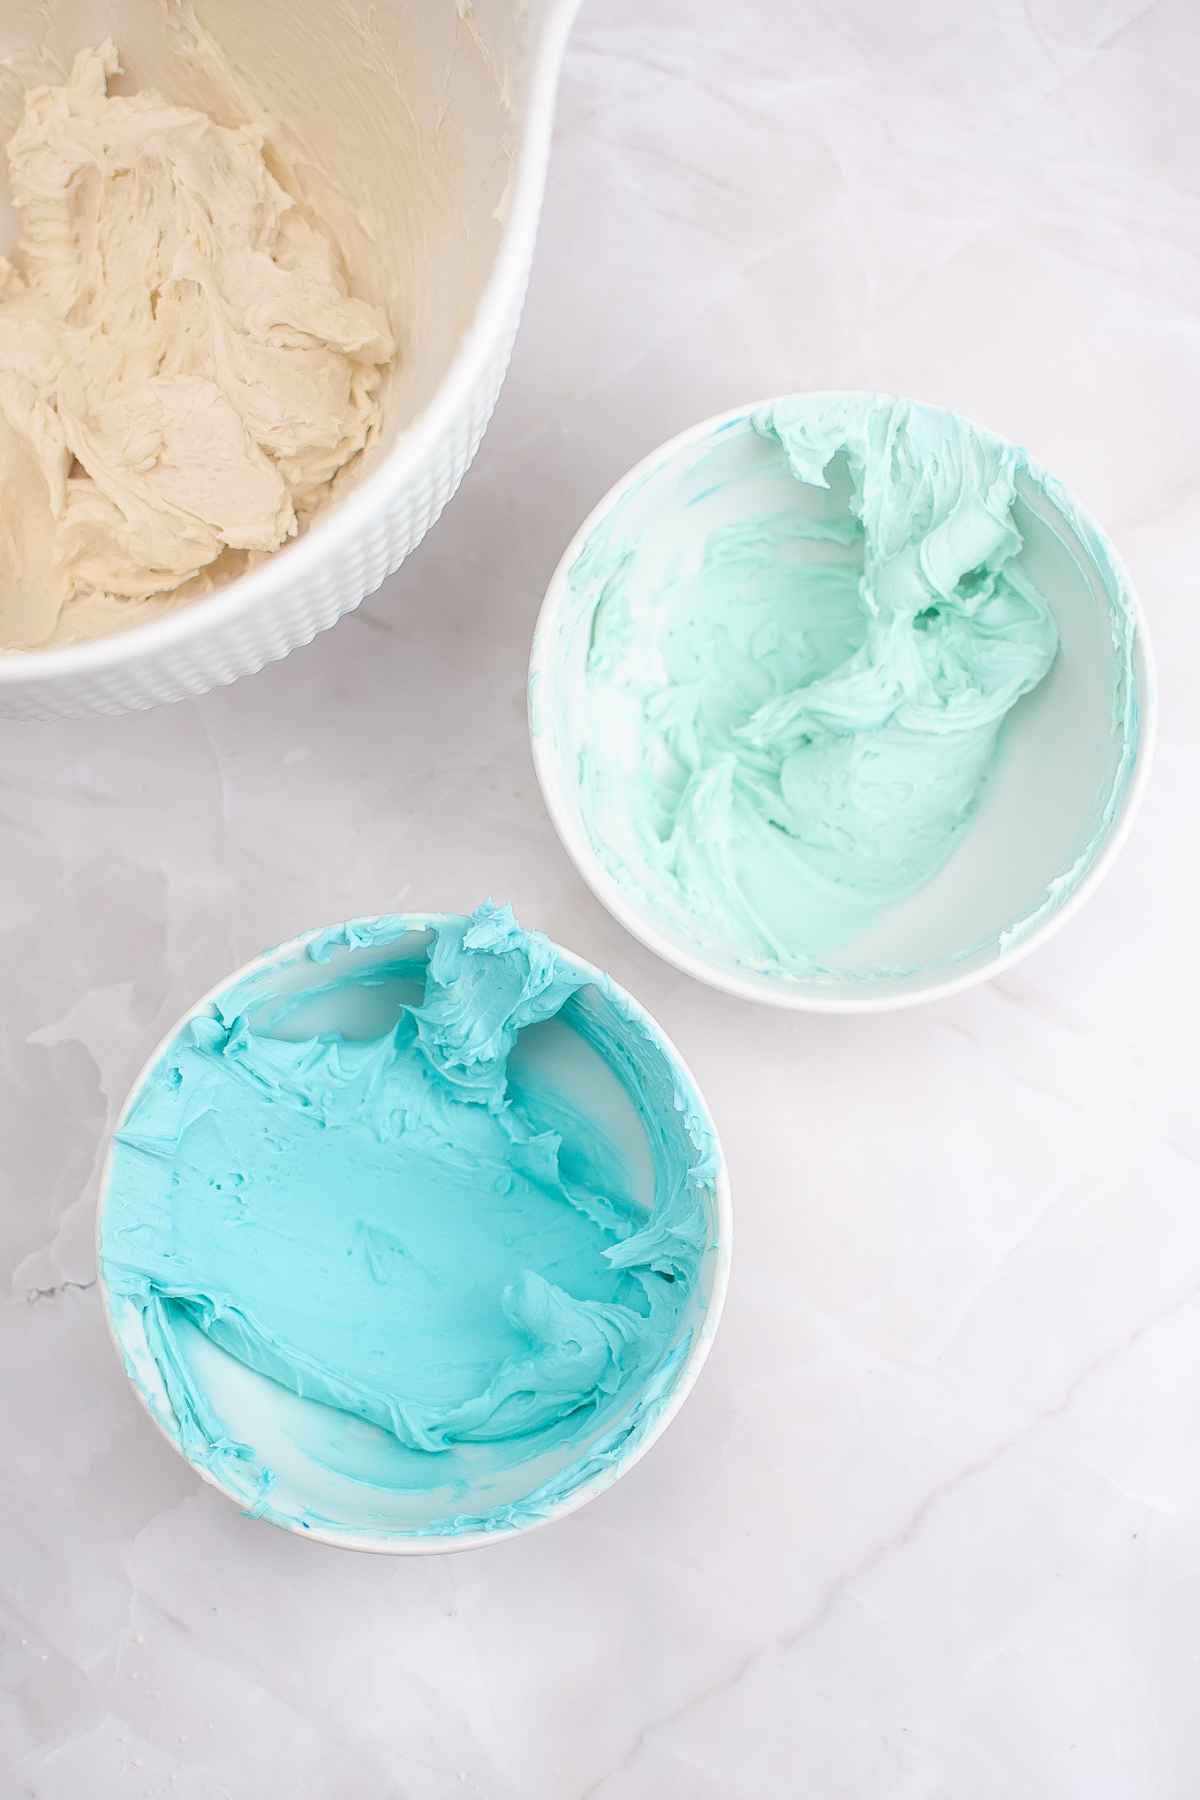 White icing, light blue icing, and dark blue icing.